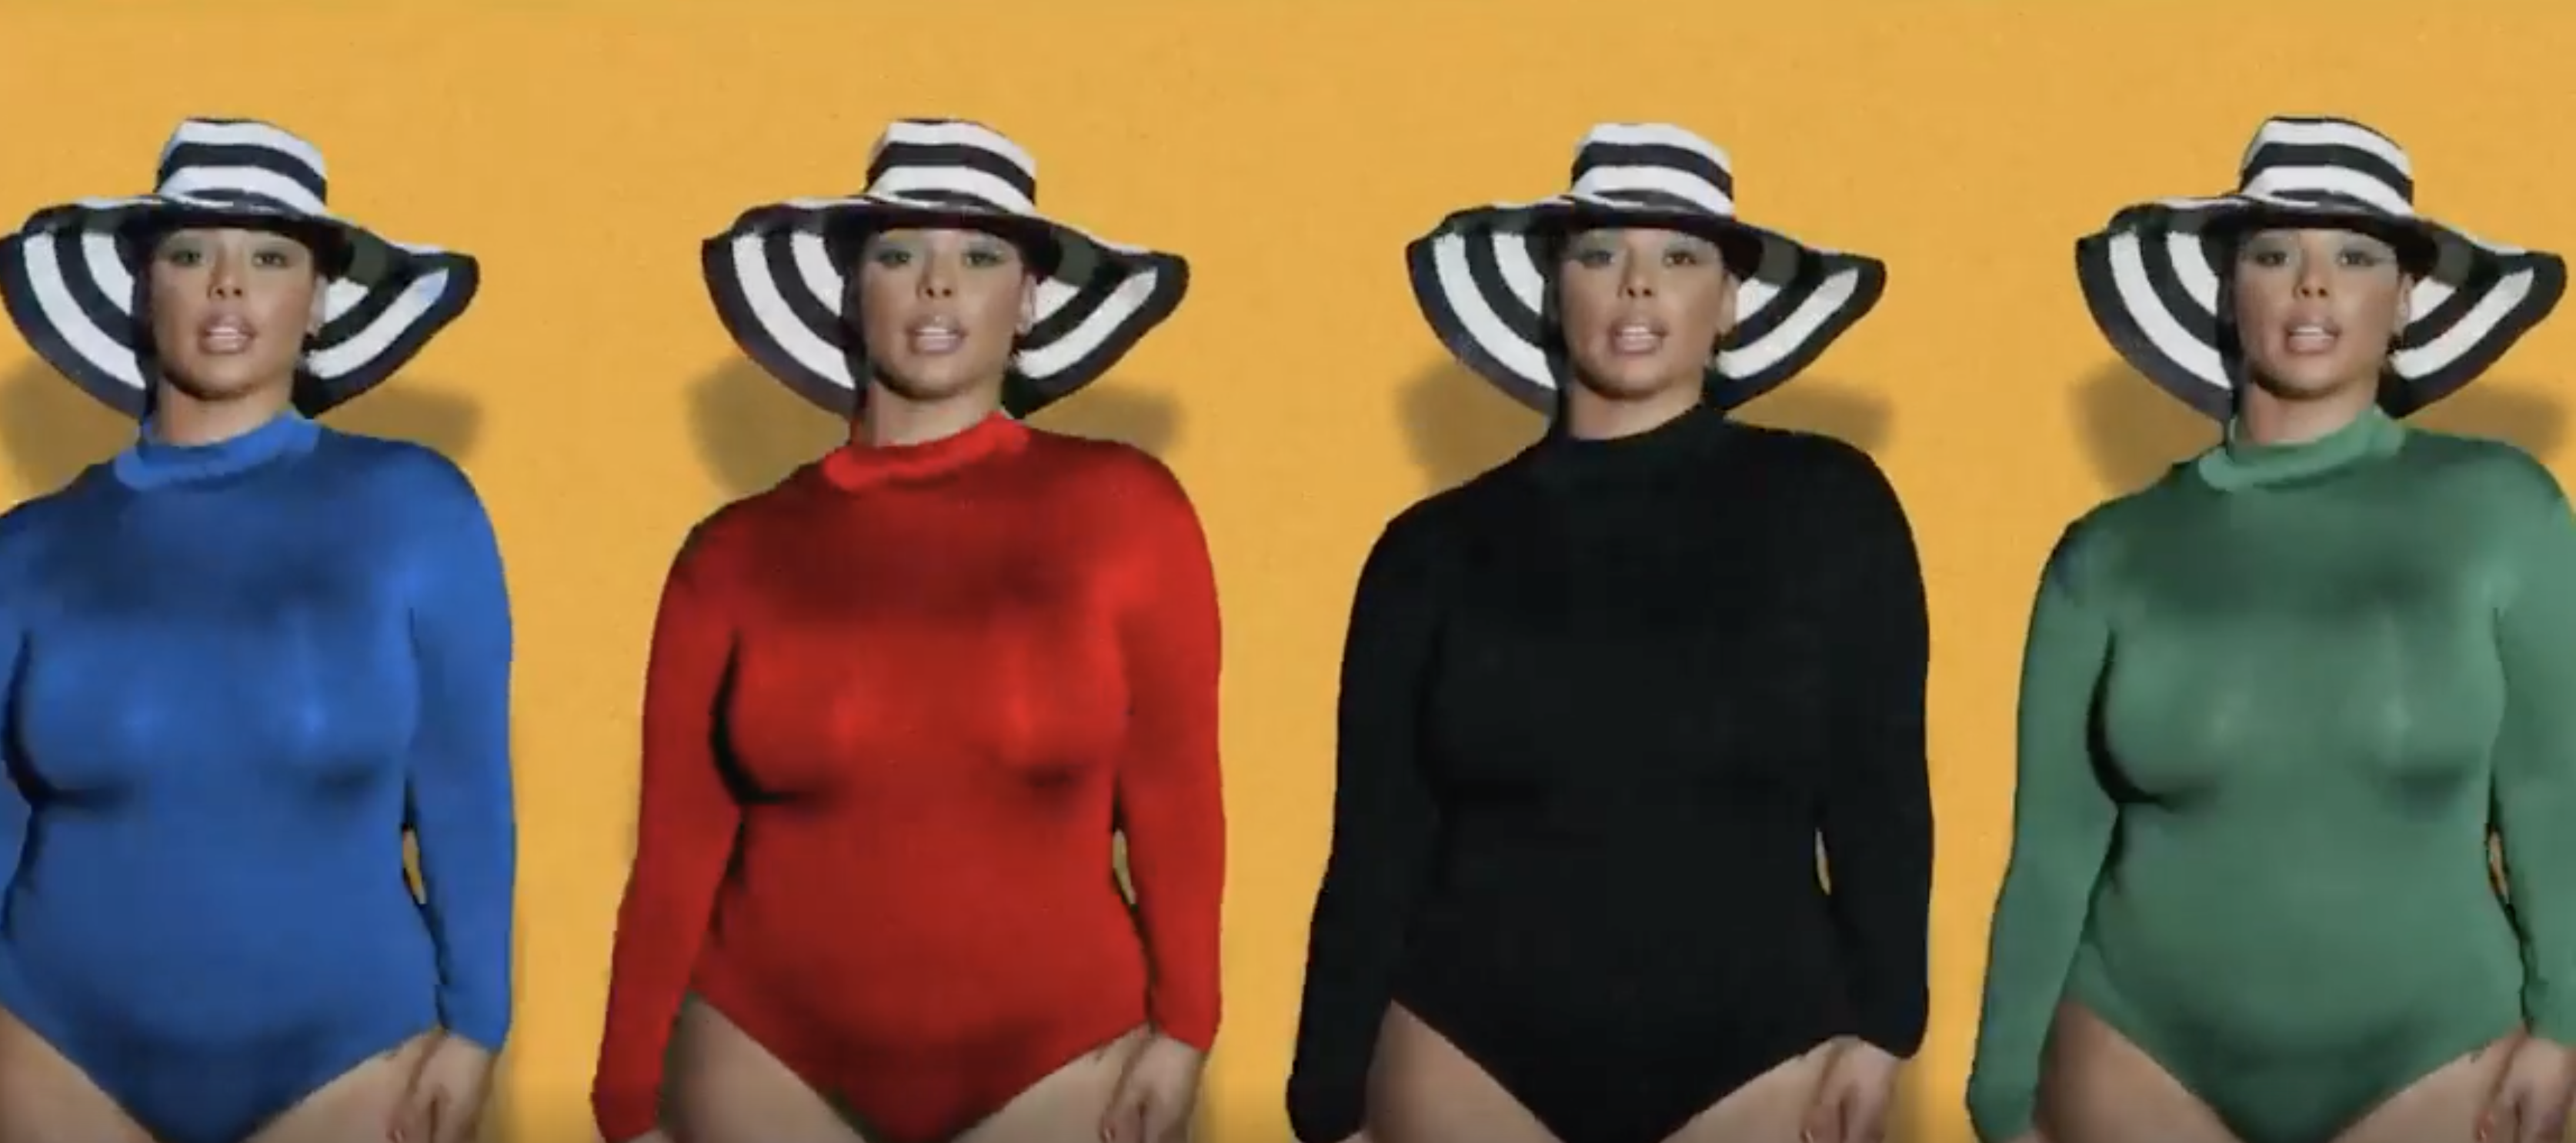 Model Tabria Majors Breaks The Internet With 10-Minute Tribute To Beyoncé